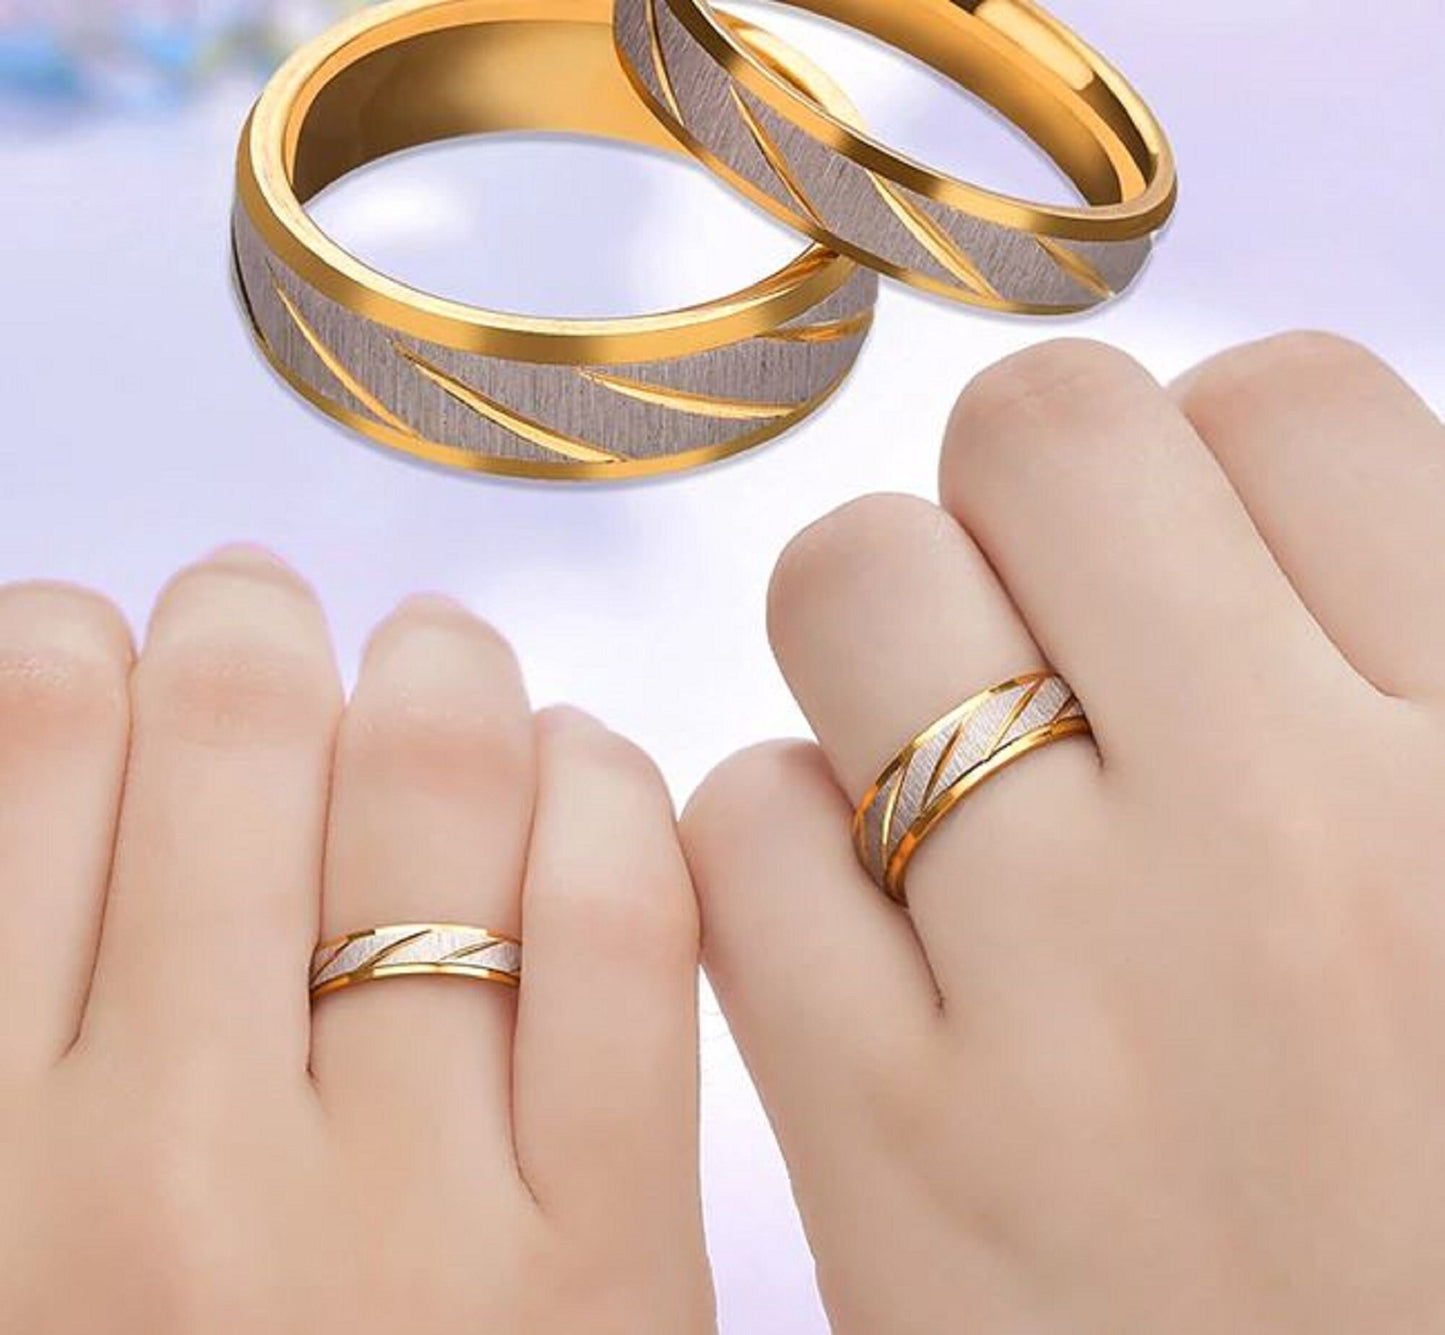 Frosted Silver Titanium Steel Couples Ring Set for Him & Her - Diagonal Stripe Gold Color - Friendship, Promise, Engagement, Wedding.